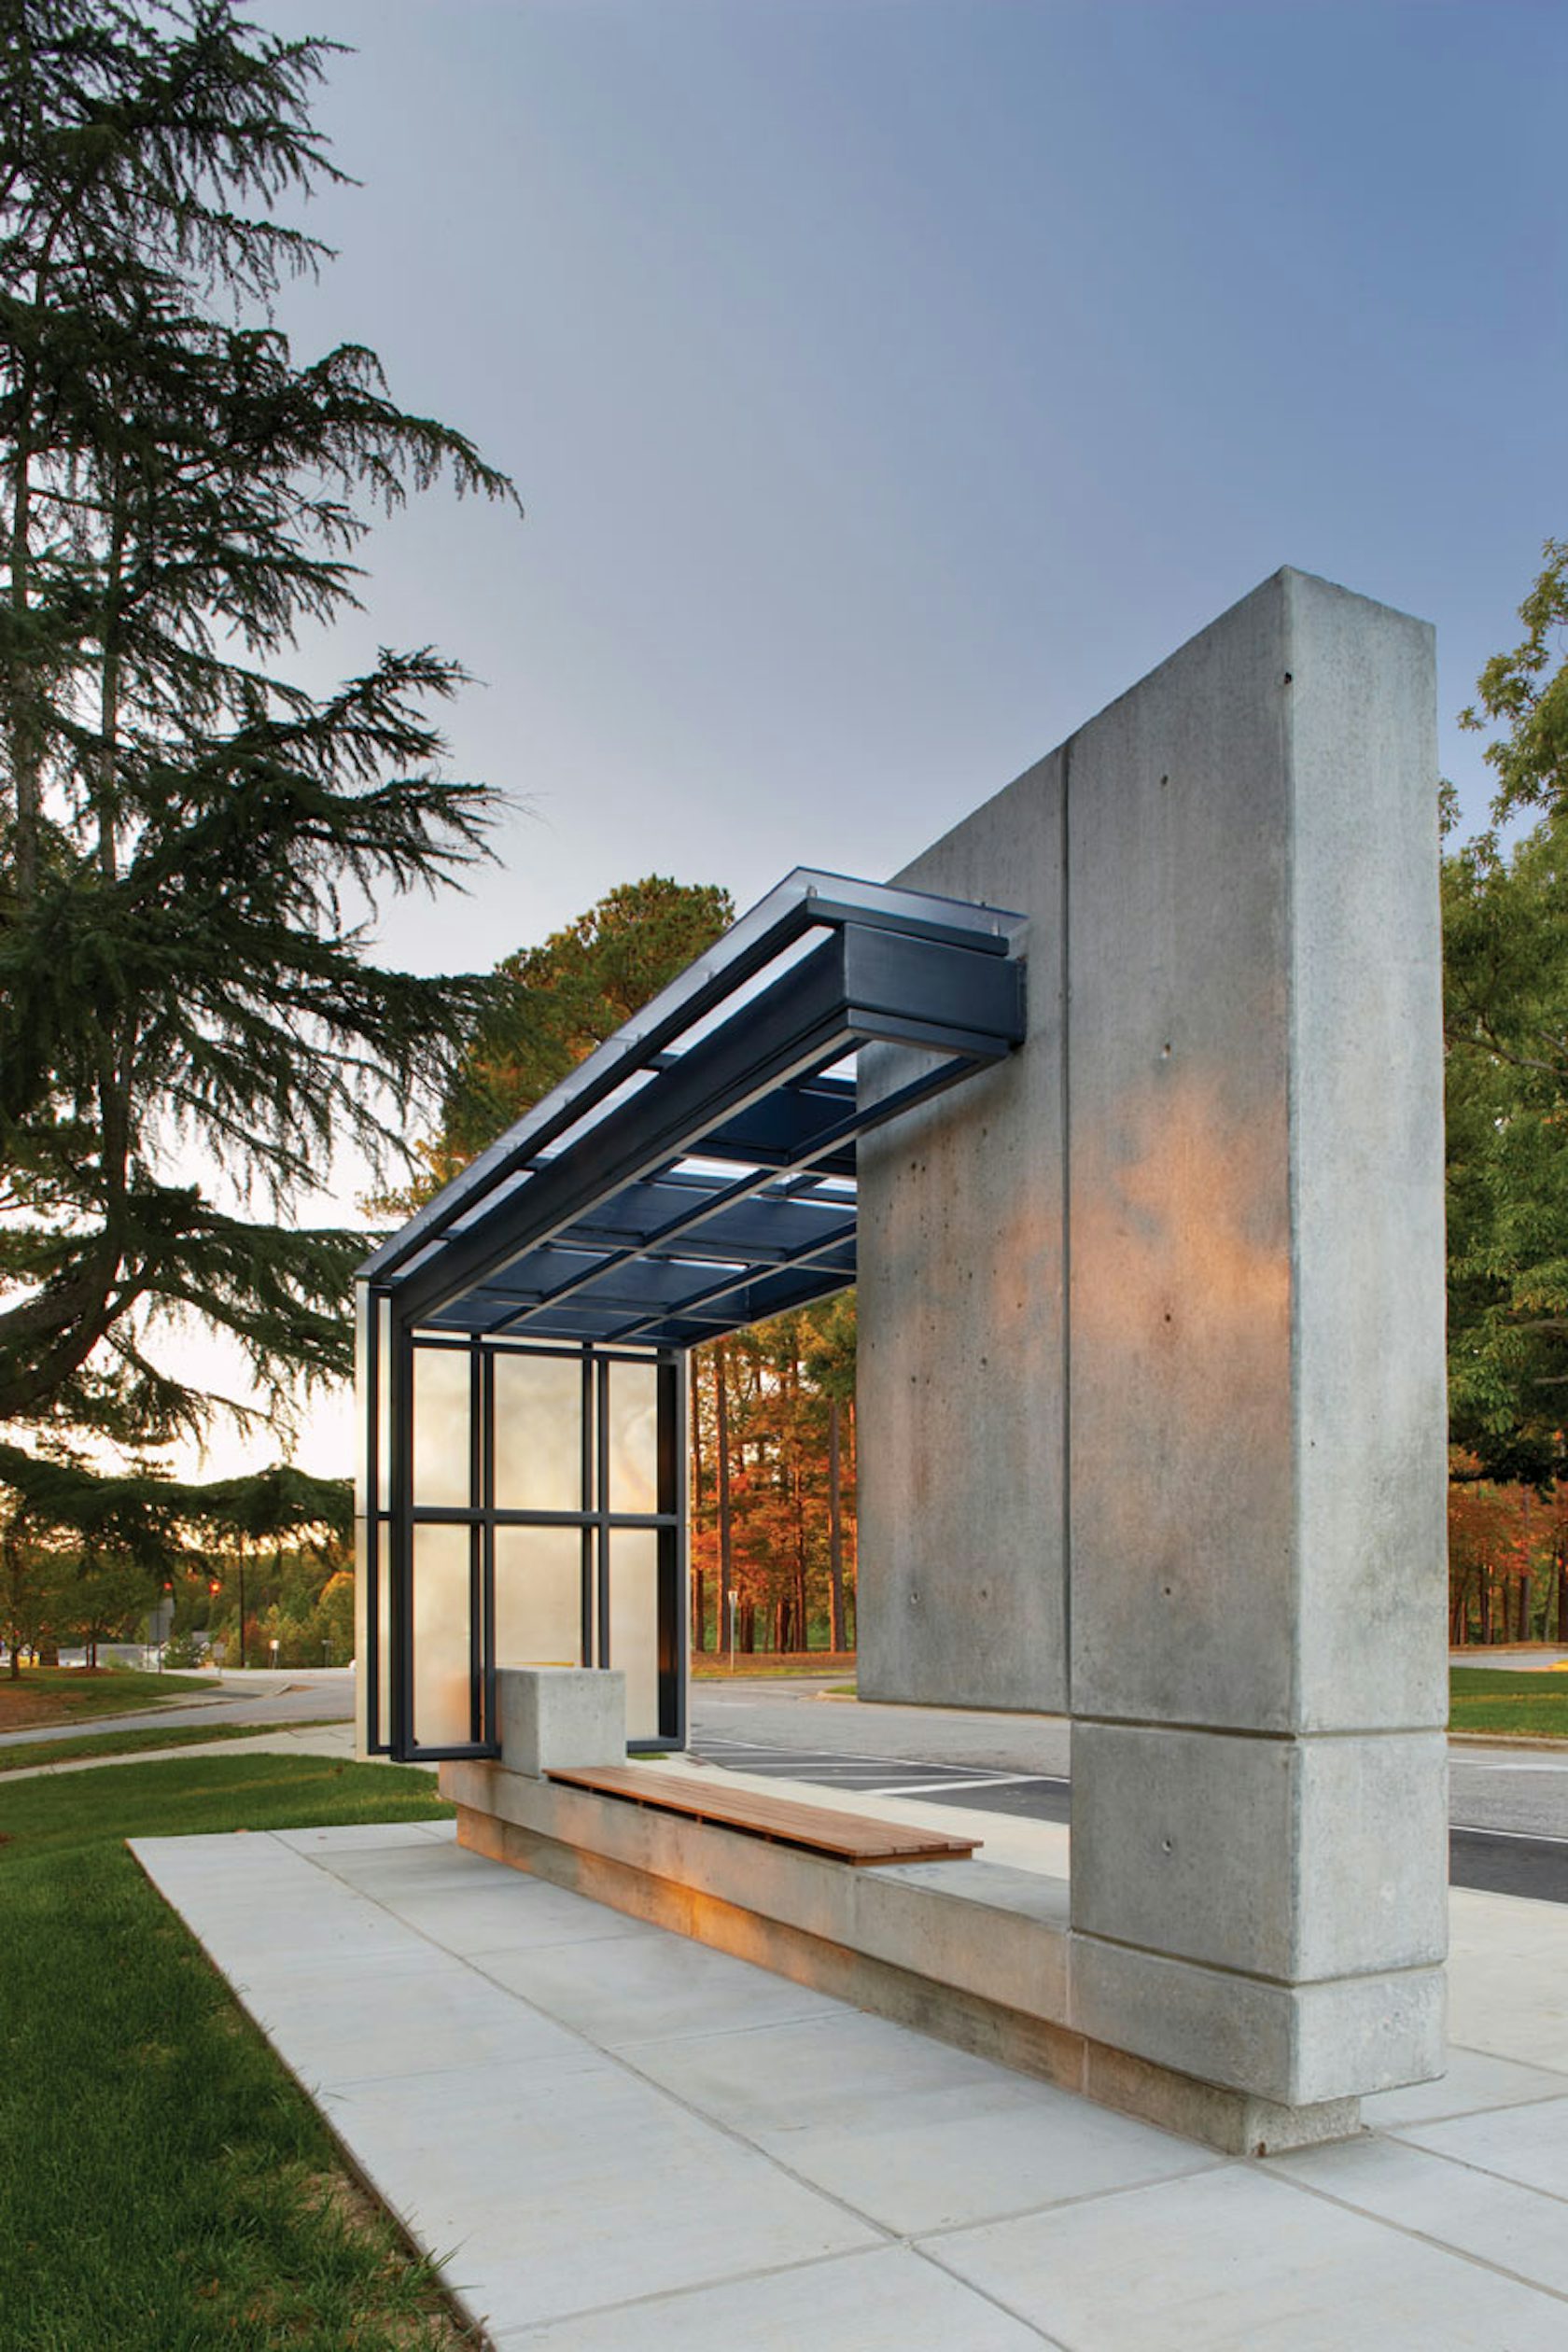 modern bus shelters designs